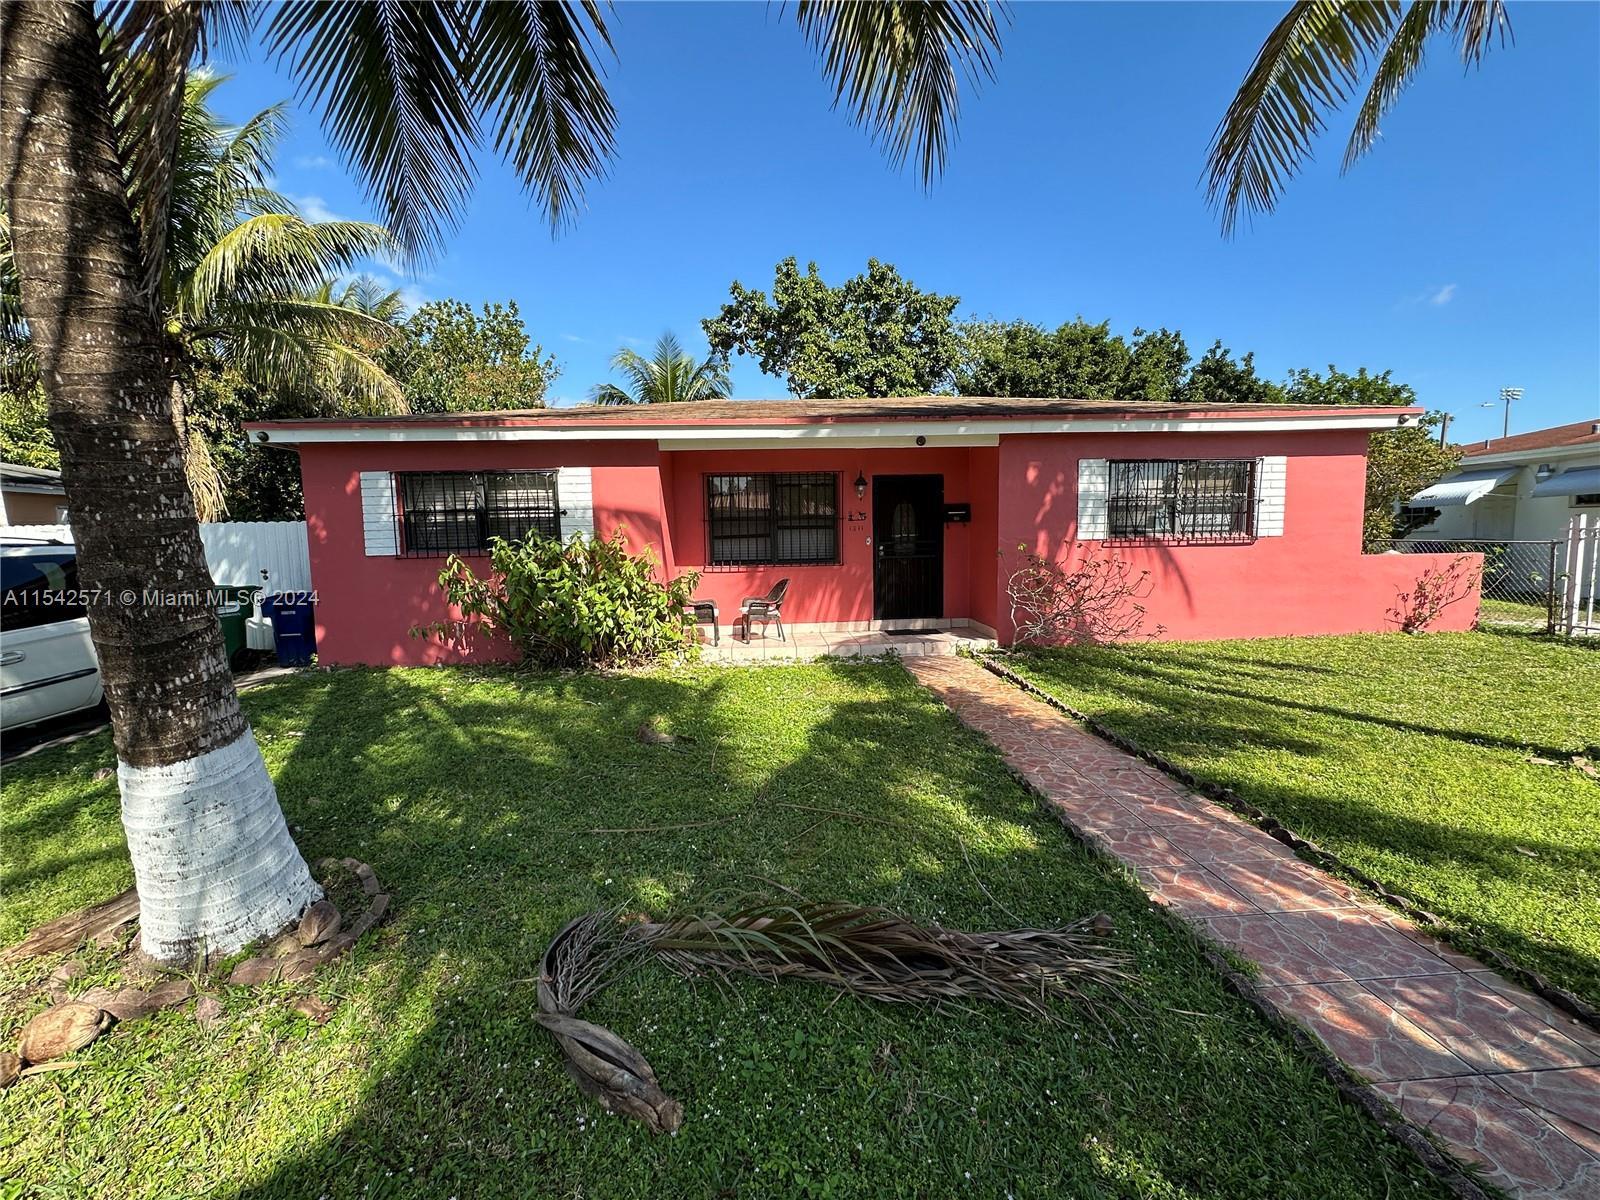 Photo of 1311 NW 132nd Ter in Miami, FL